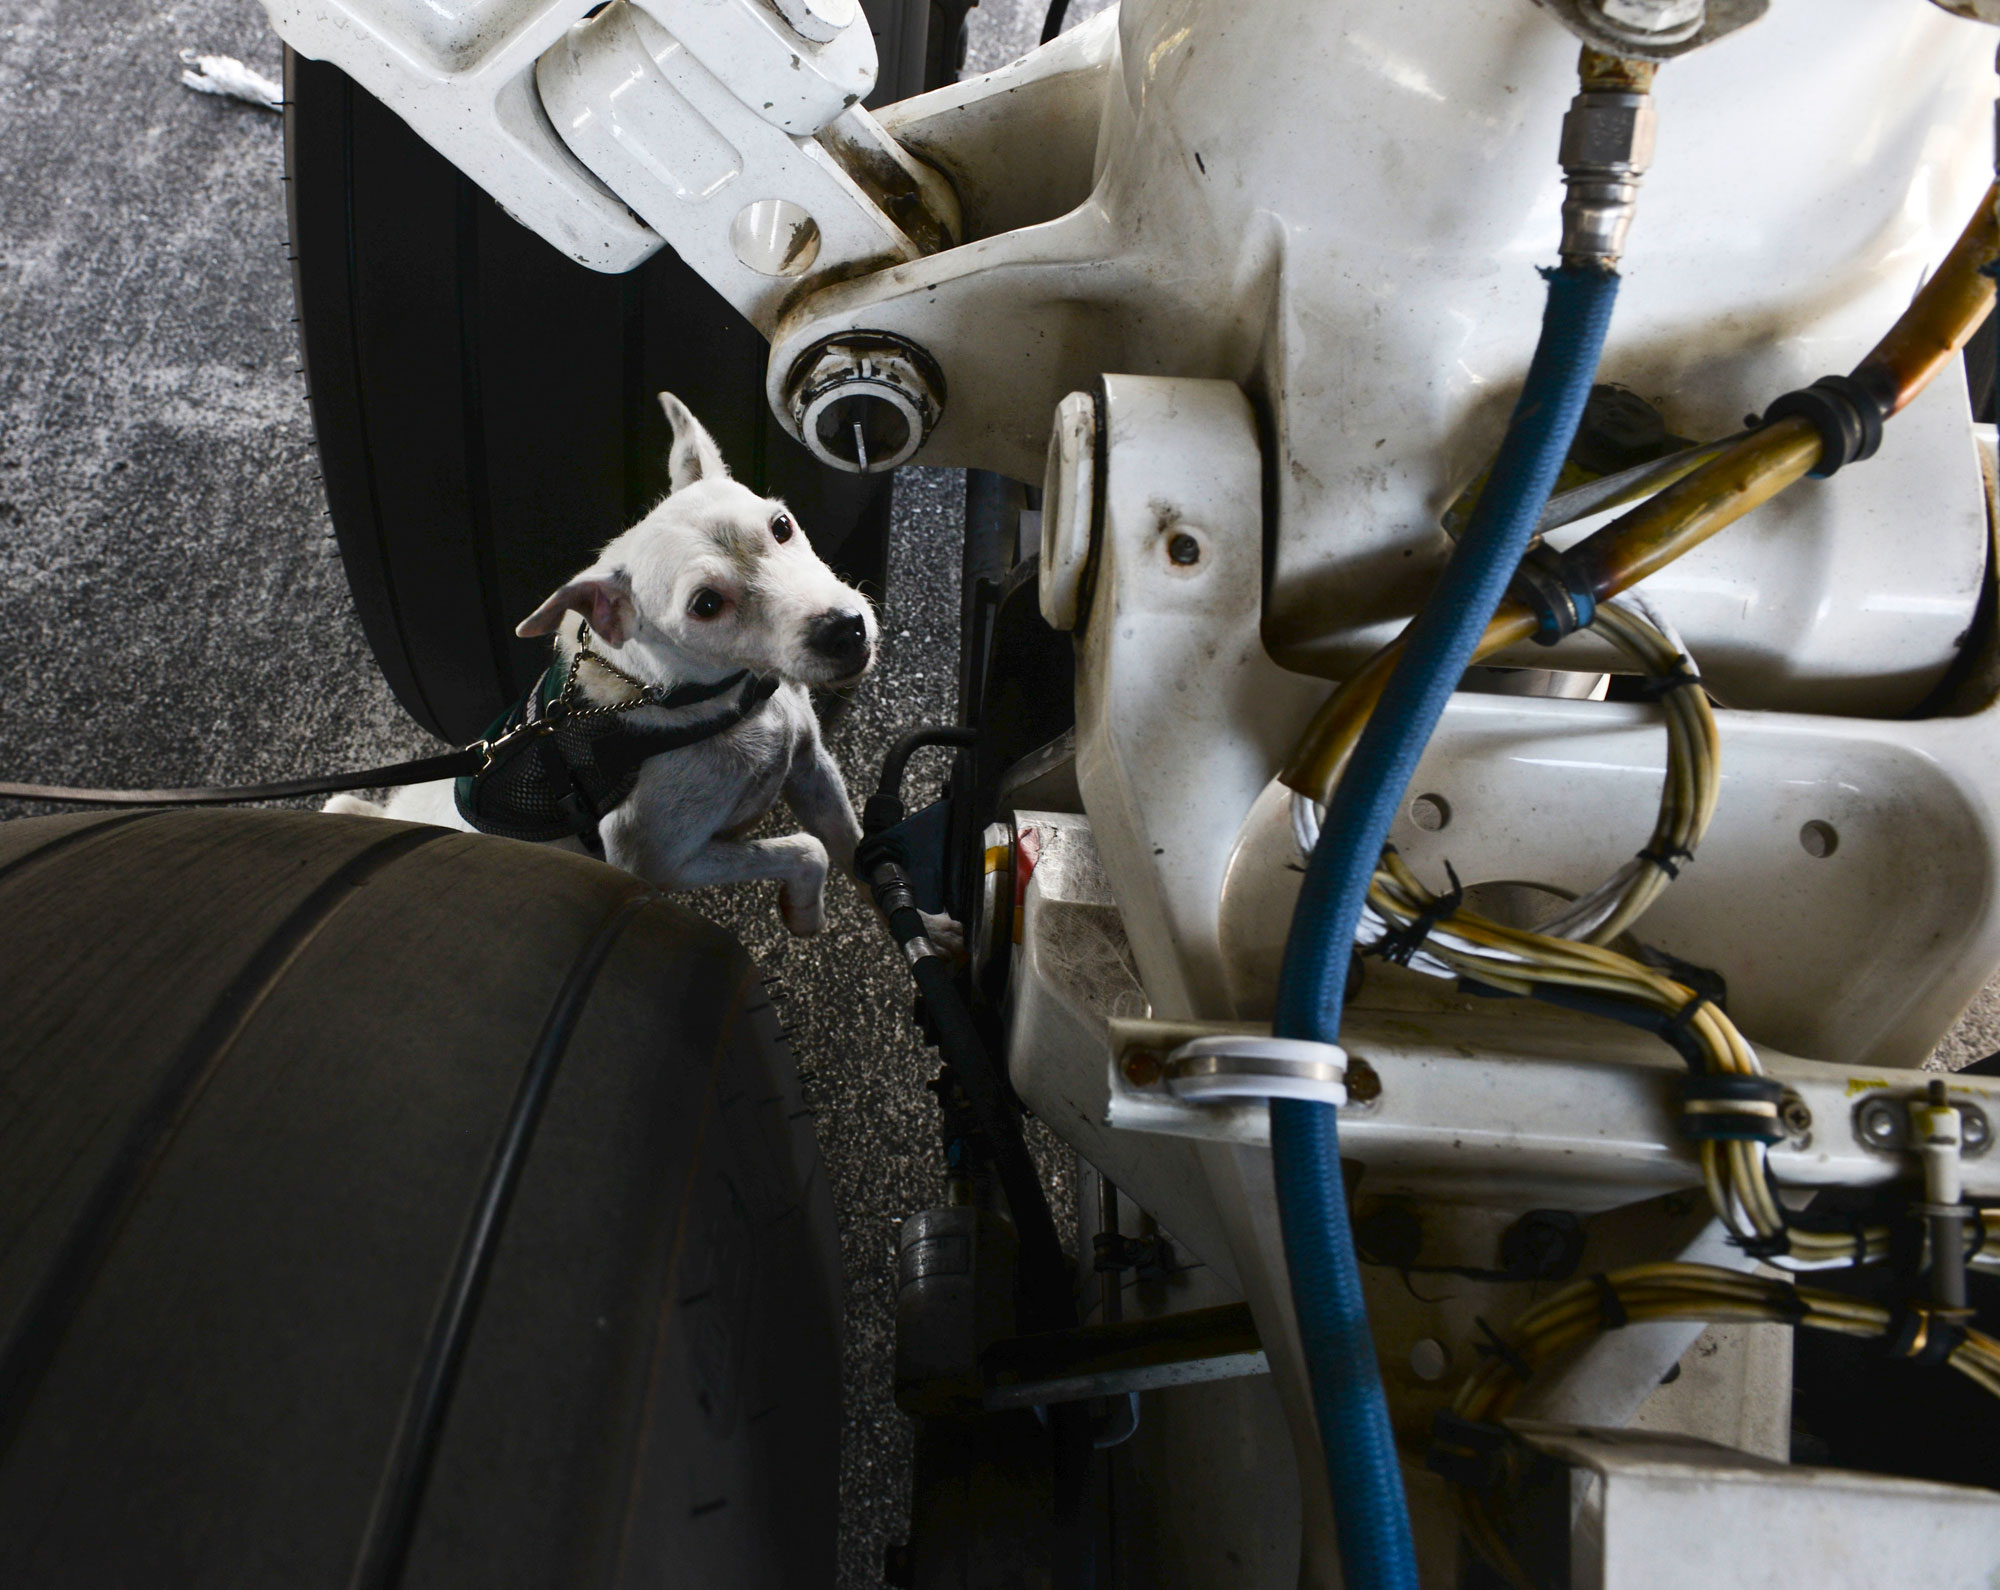 A dog inspecting an airplane for brown tree snakes.